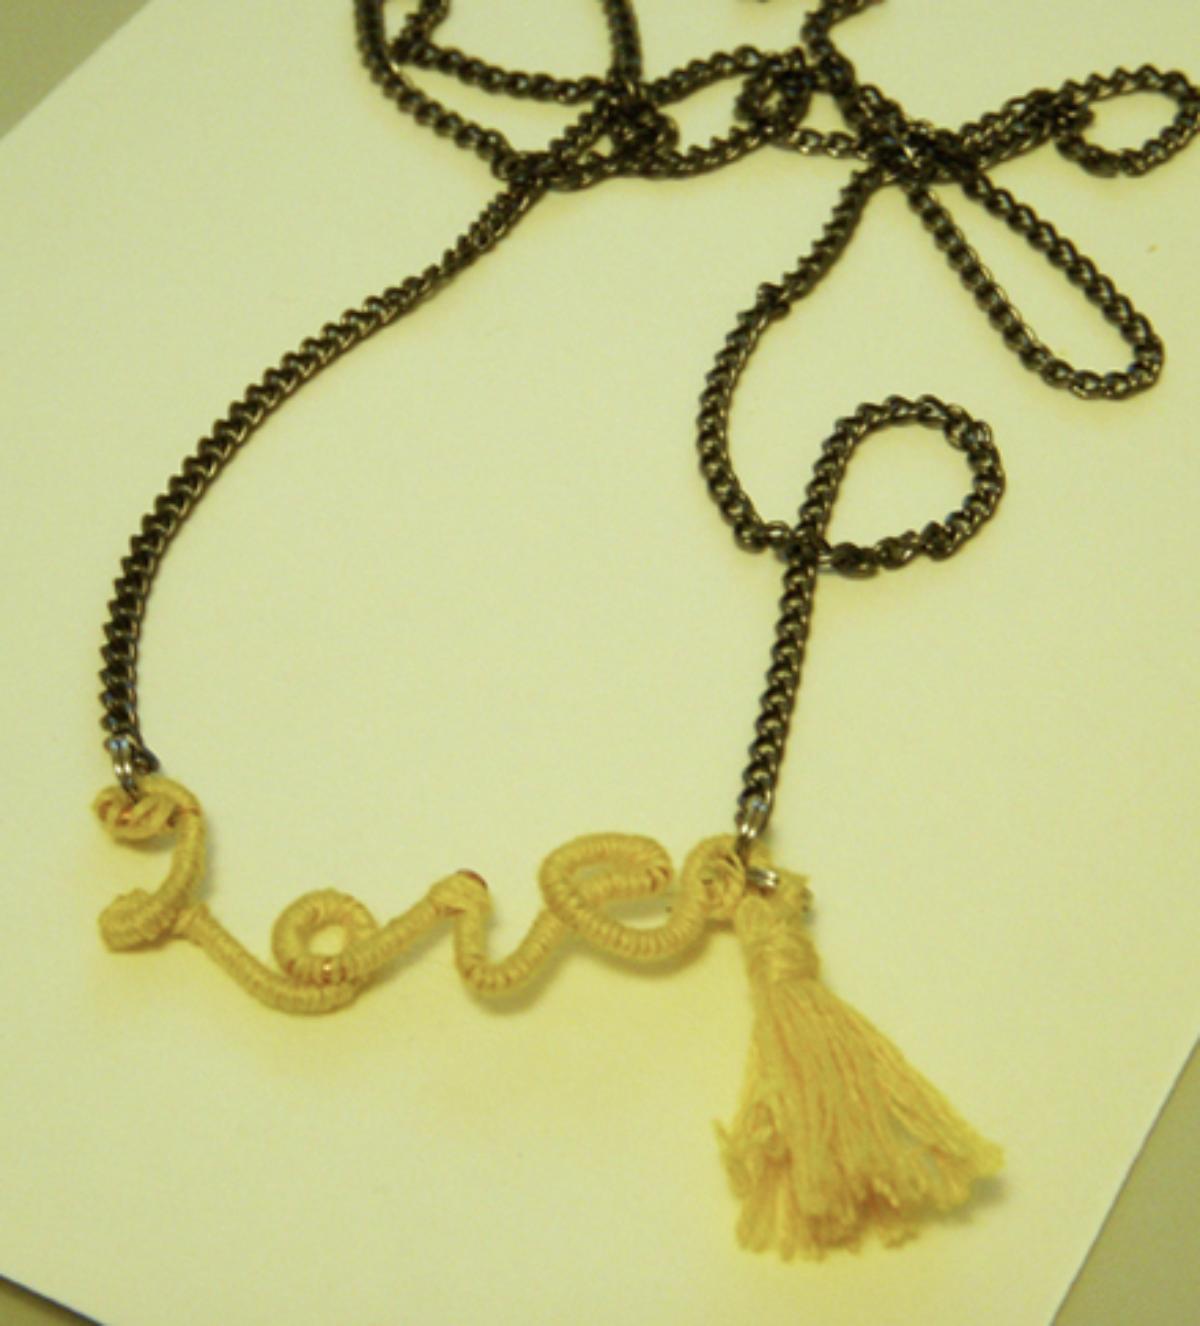 Anthro Knock-Off Love Necklace